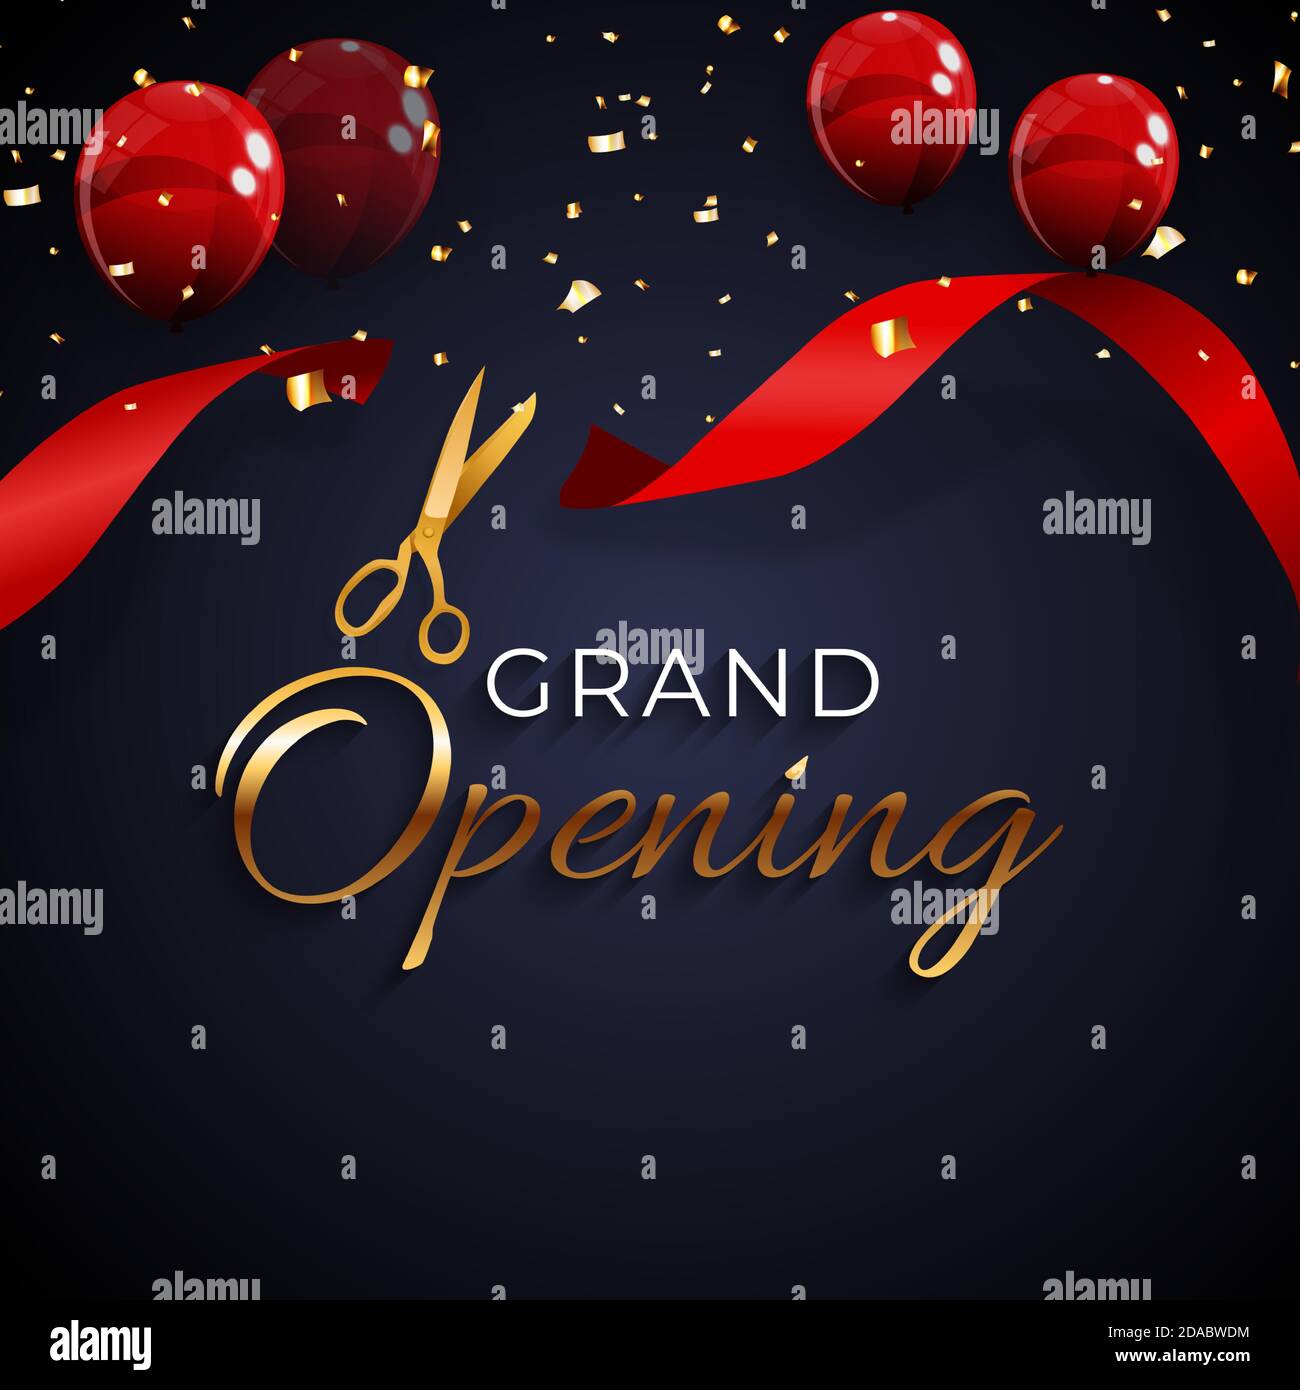 Grand Opening Card with Ribbon and Scissors Background 2449768